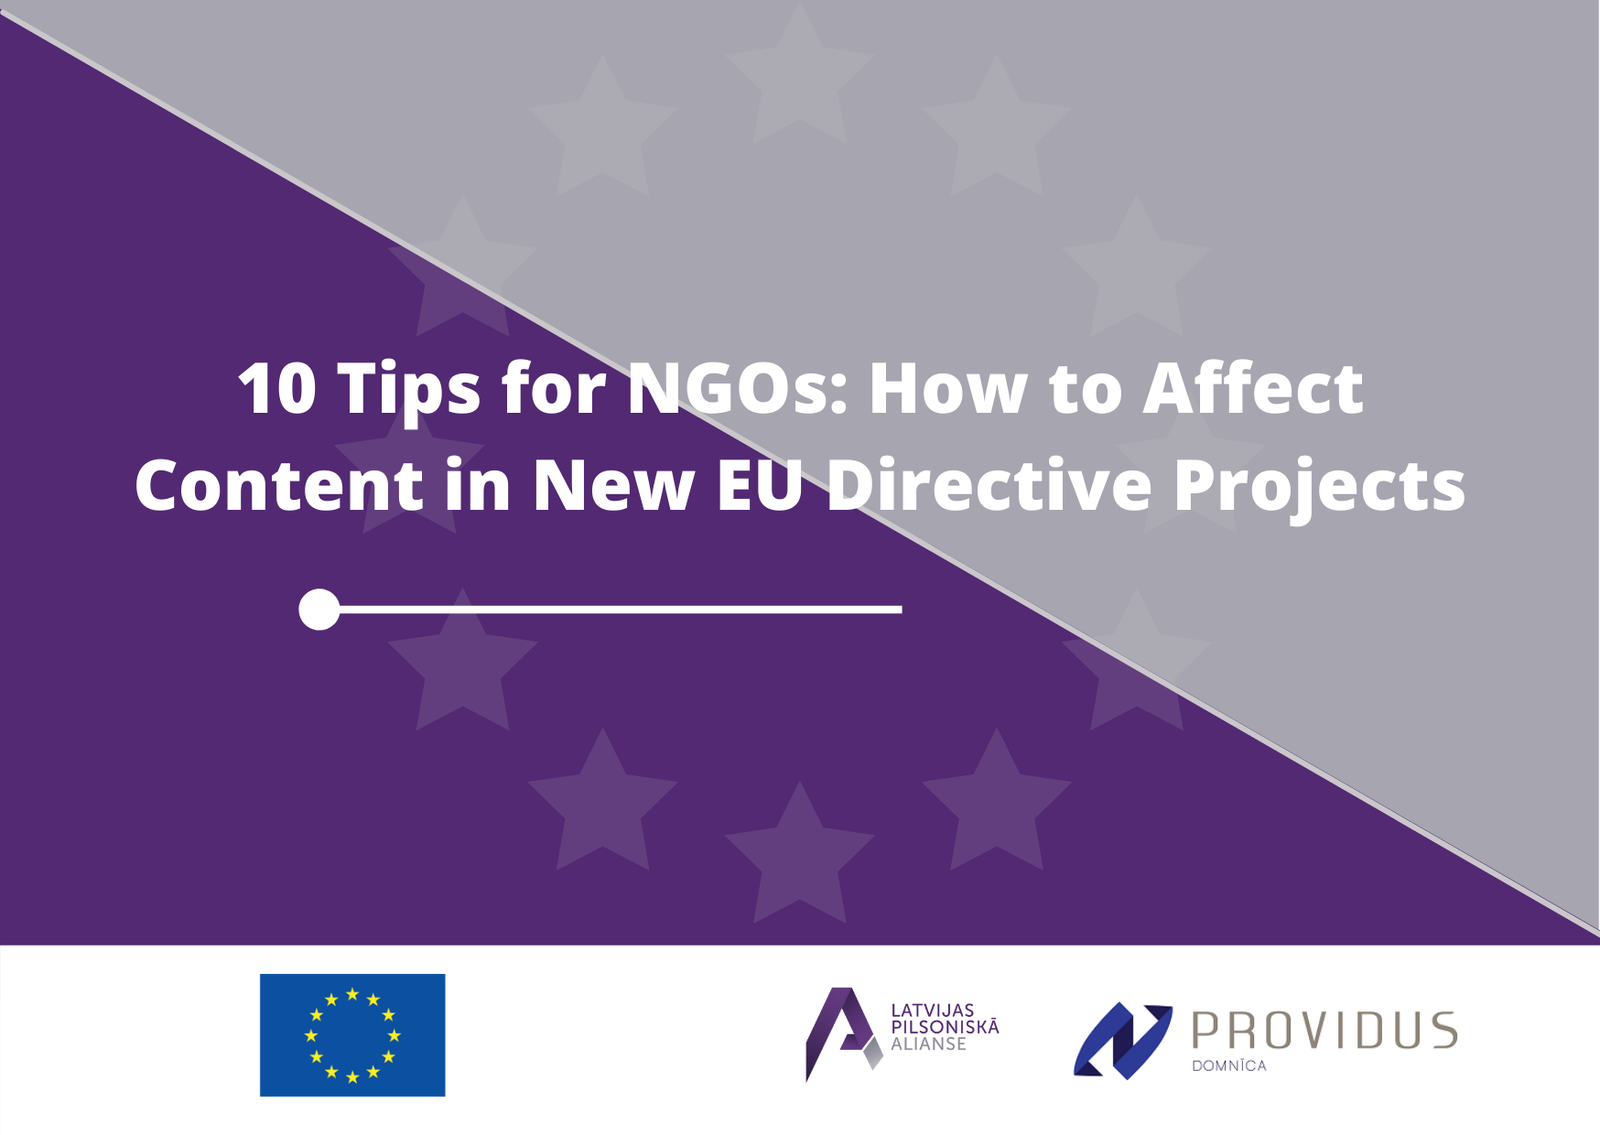 10 Tips for NGOs: How to Affect Content in New EU Directive Projects